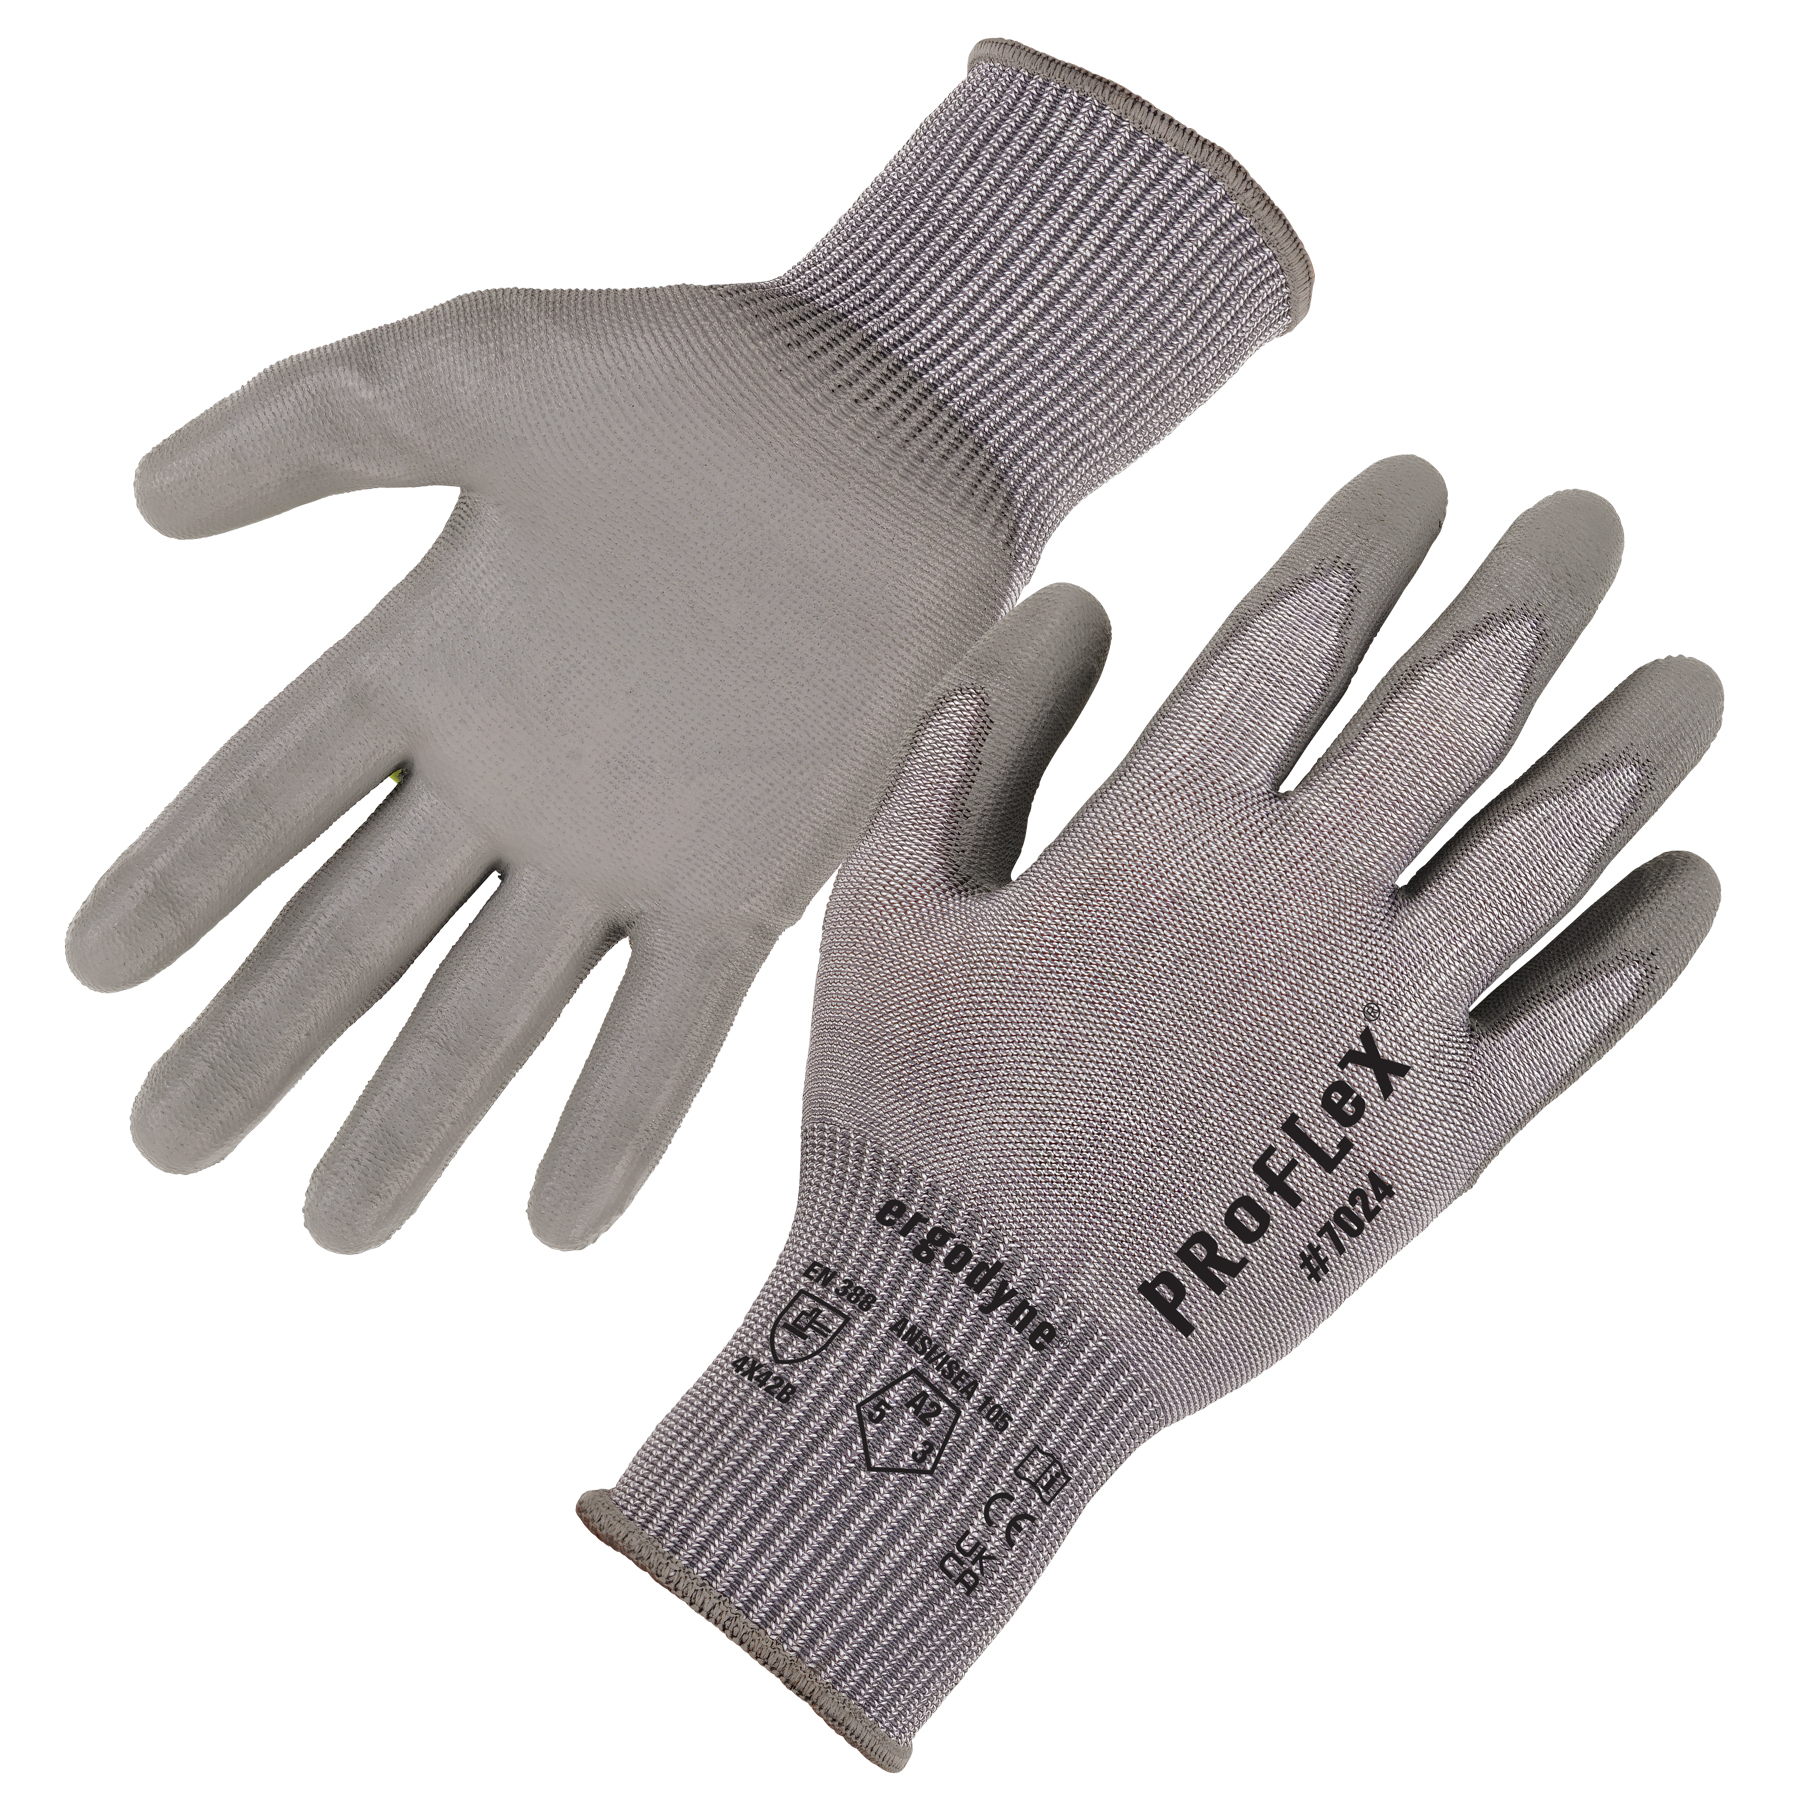 https://www.ergodyne.com/sites/default/files/product-images/7024-ansi-a2-pu-coated-cr-gloves-grey-pair_0.jpg